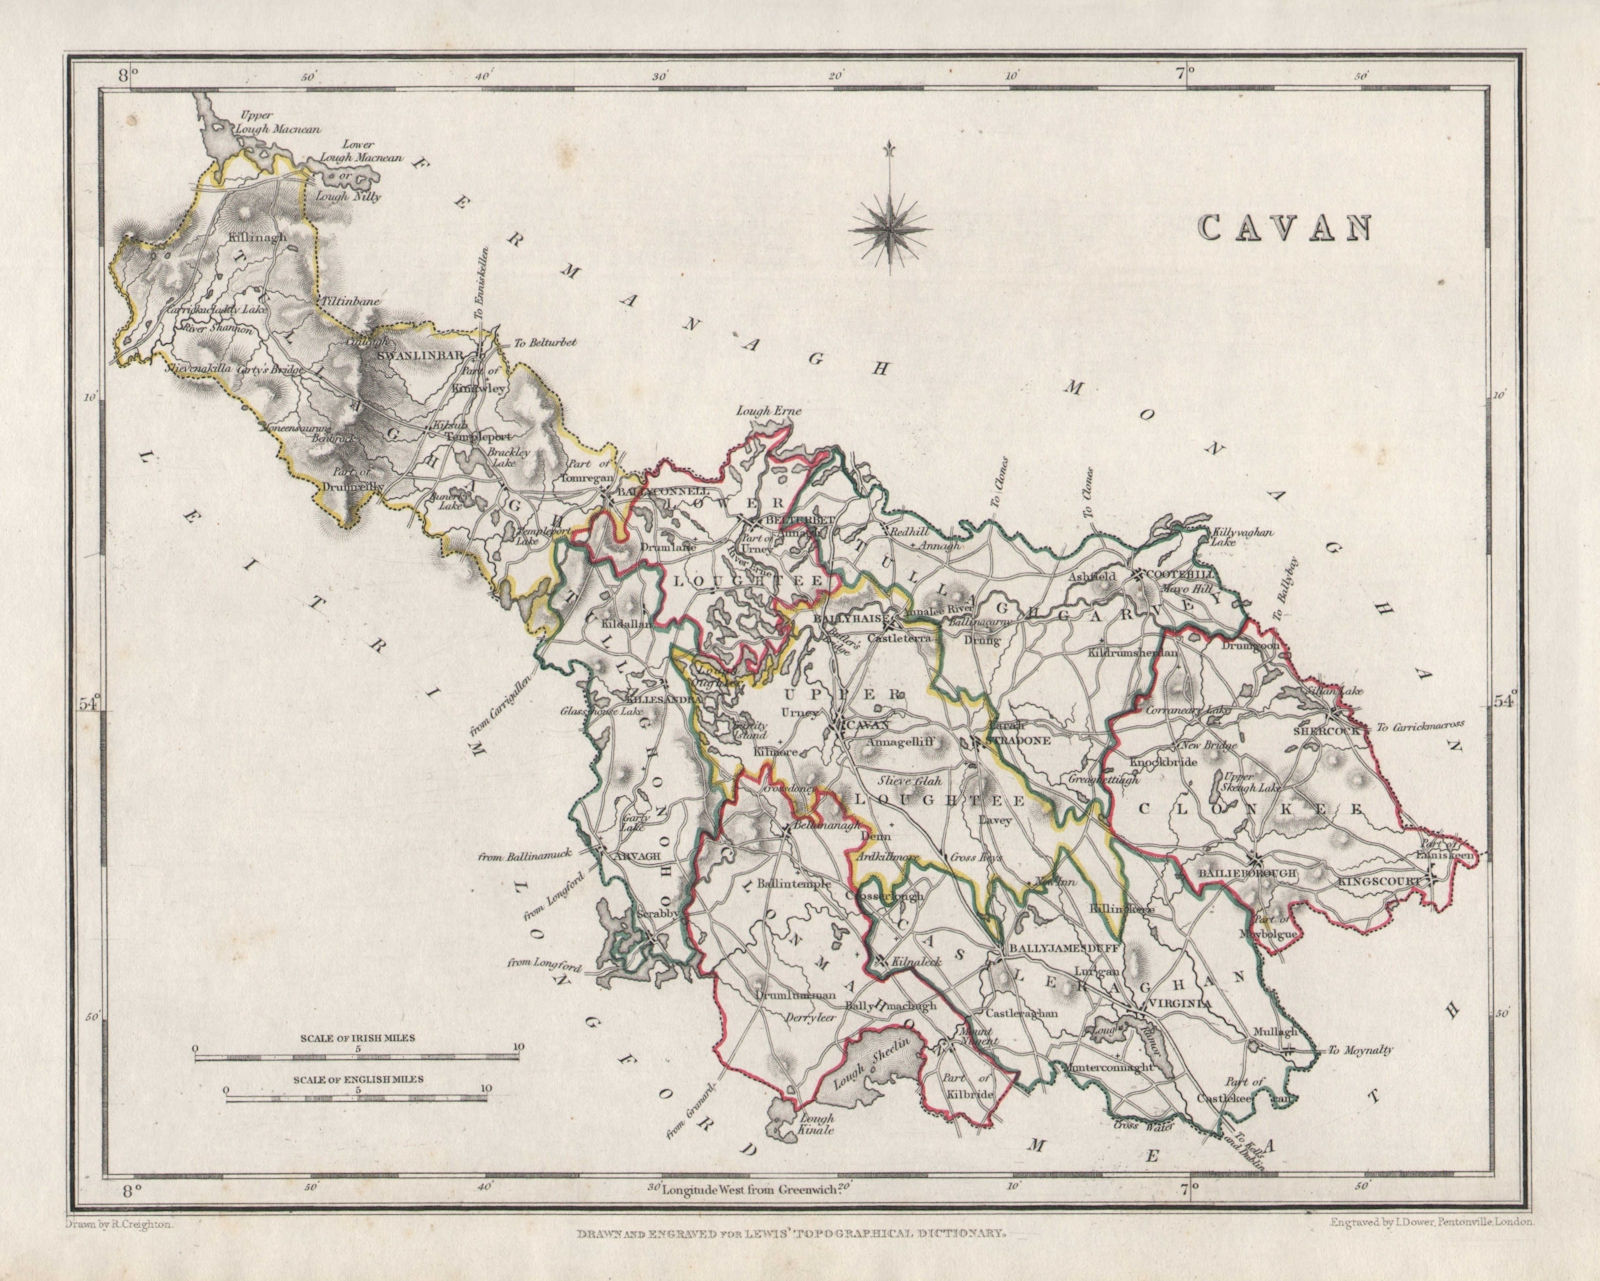 COUNTY CAVAN antique map for LEWIS by CREIGHTON & DOWER. Ireland 1846 old